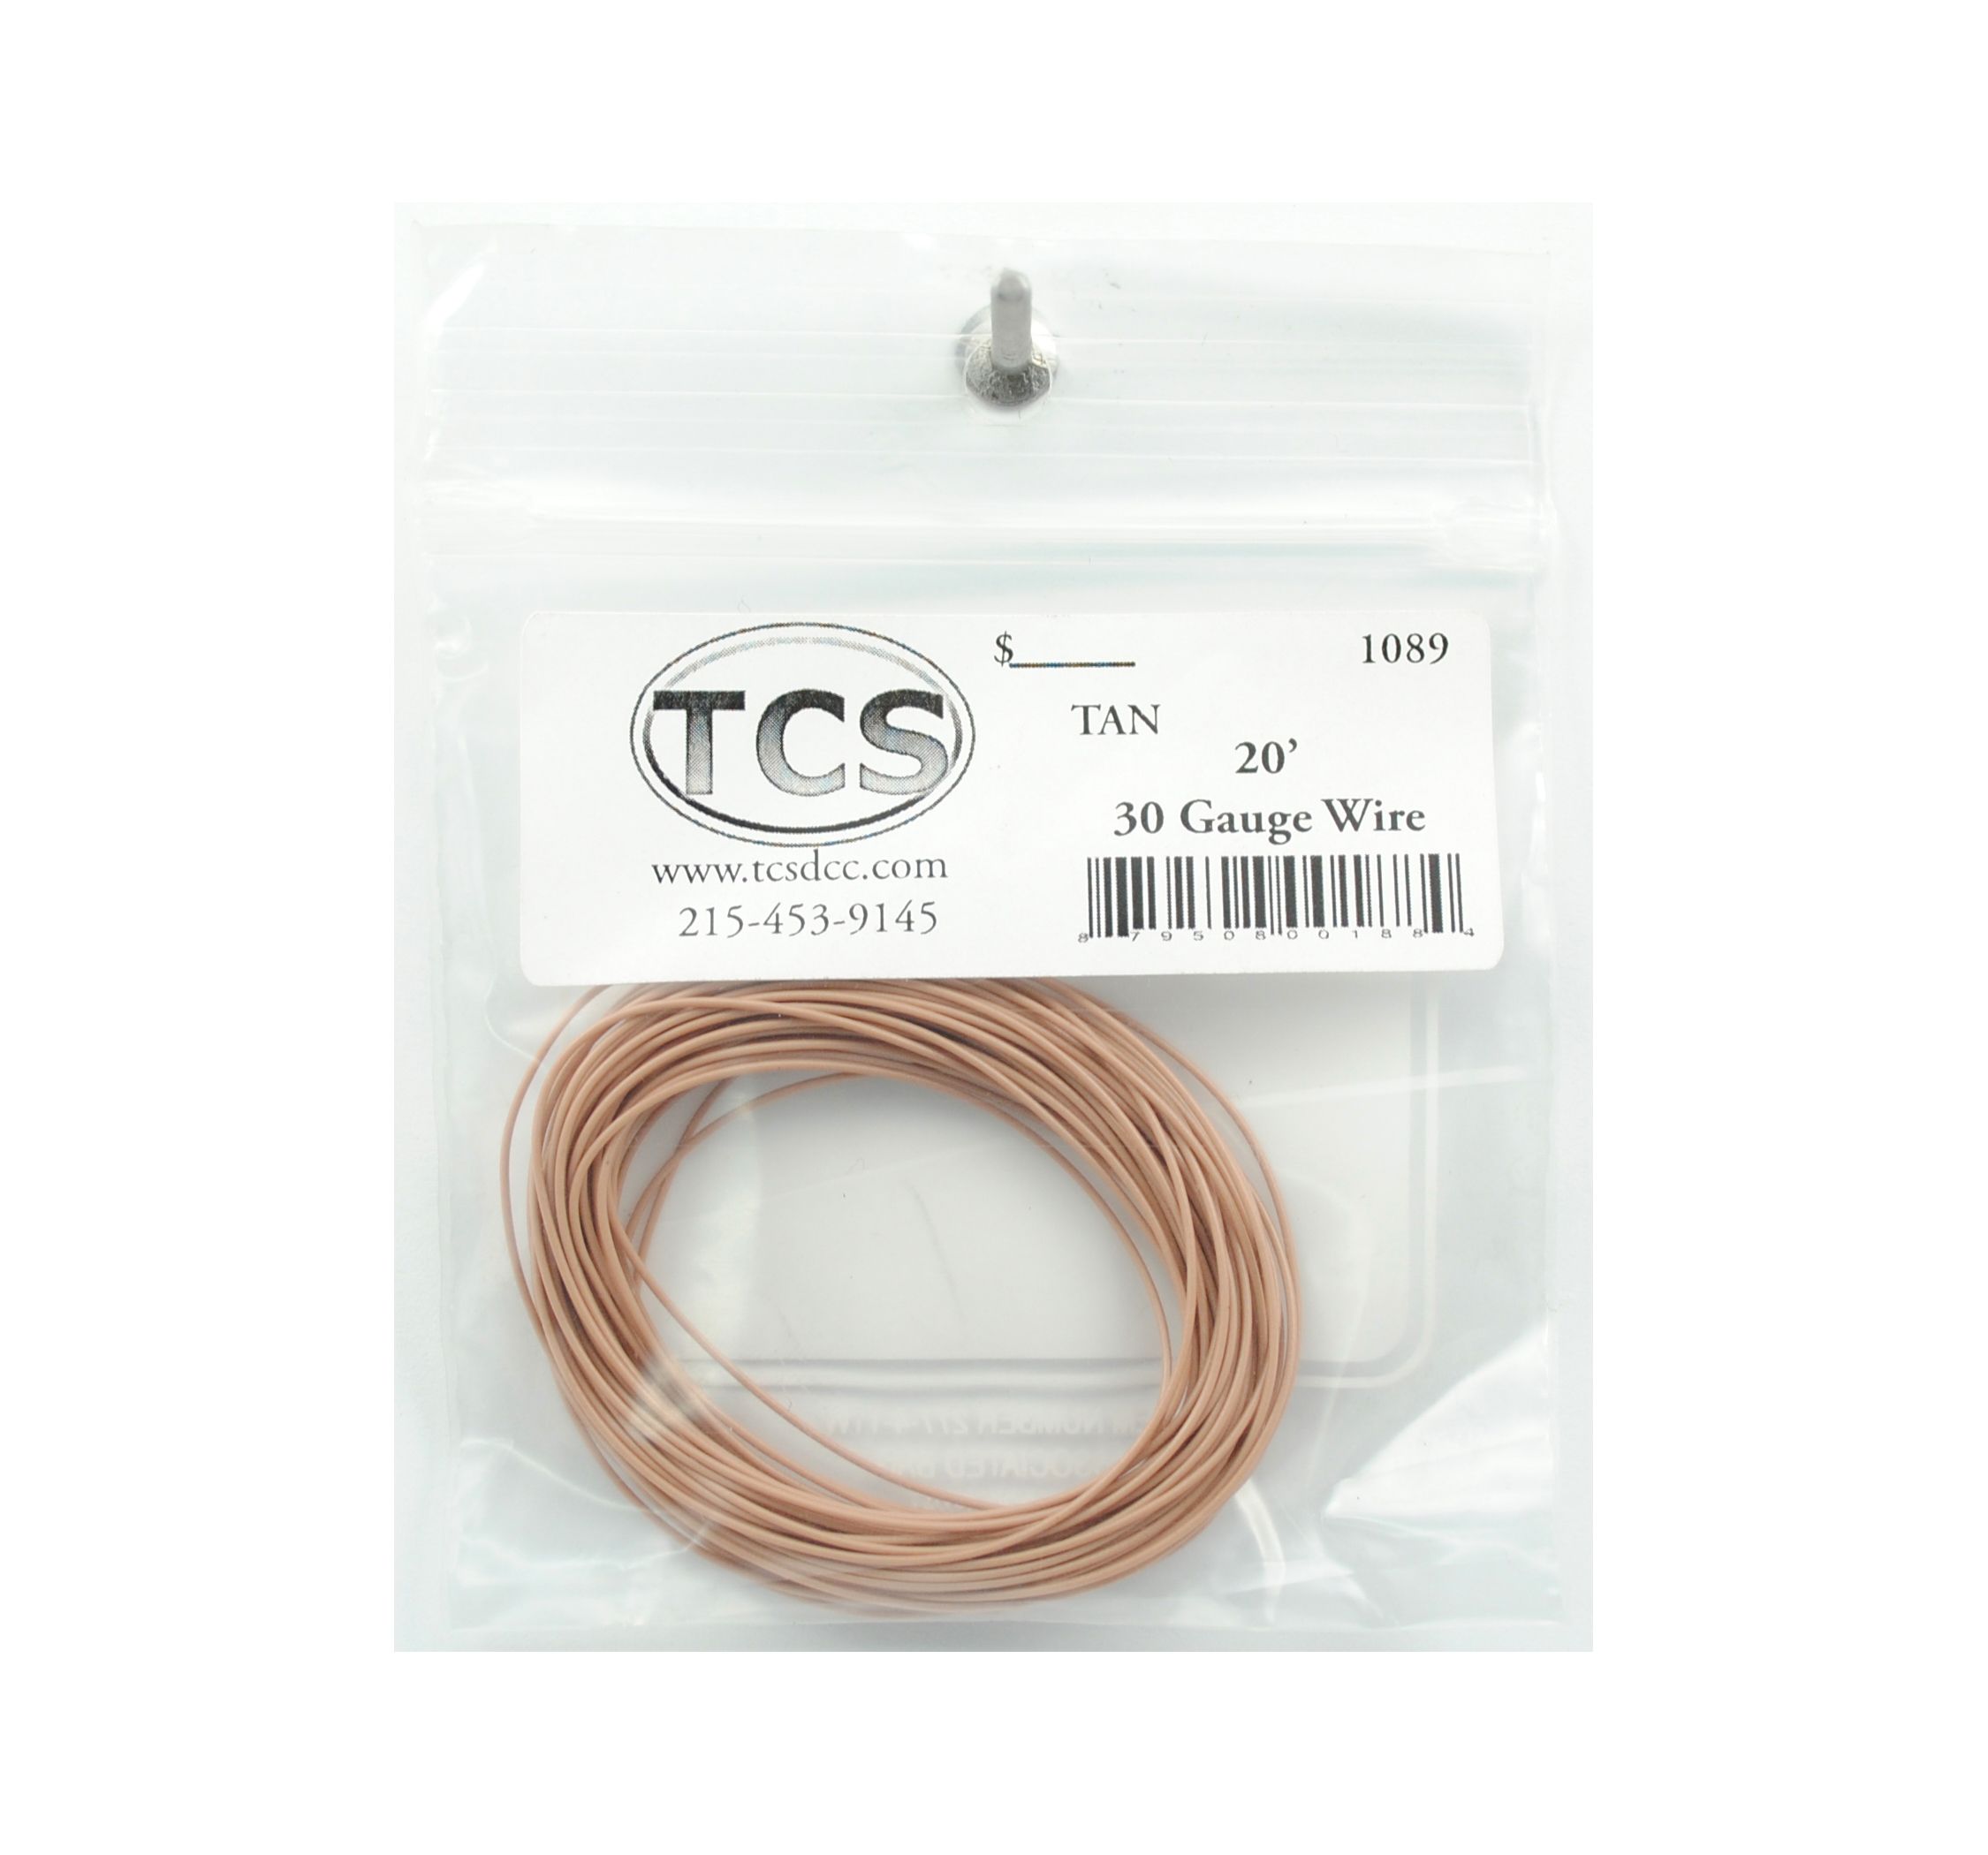 Details about   DCC Train Control Systems TCS T-3.5" Harness 9-pin JST to 8-pin NMRA plug 